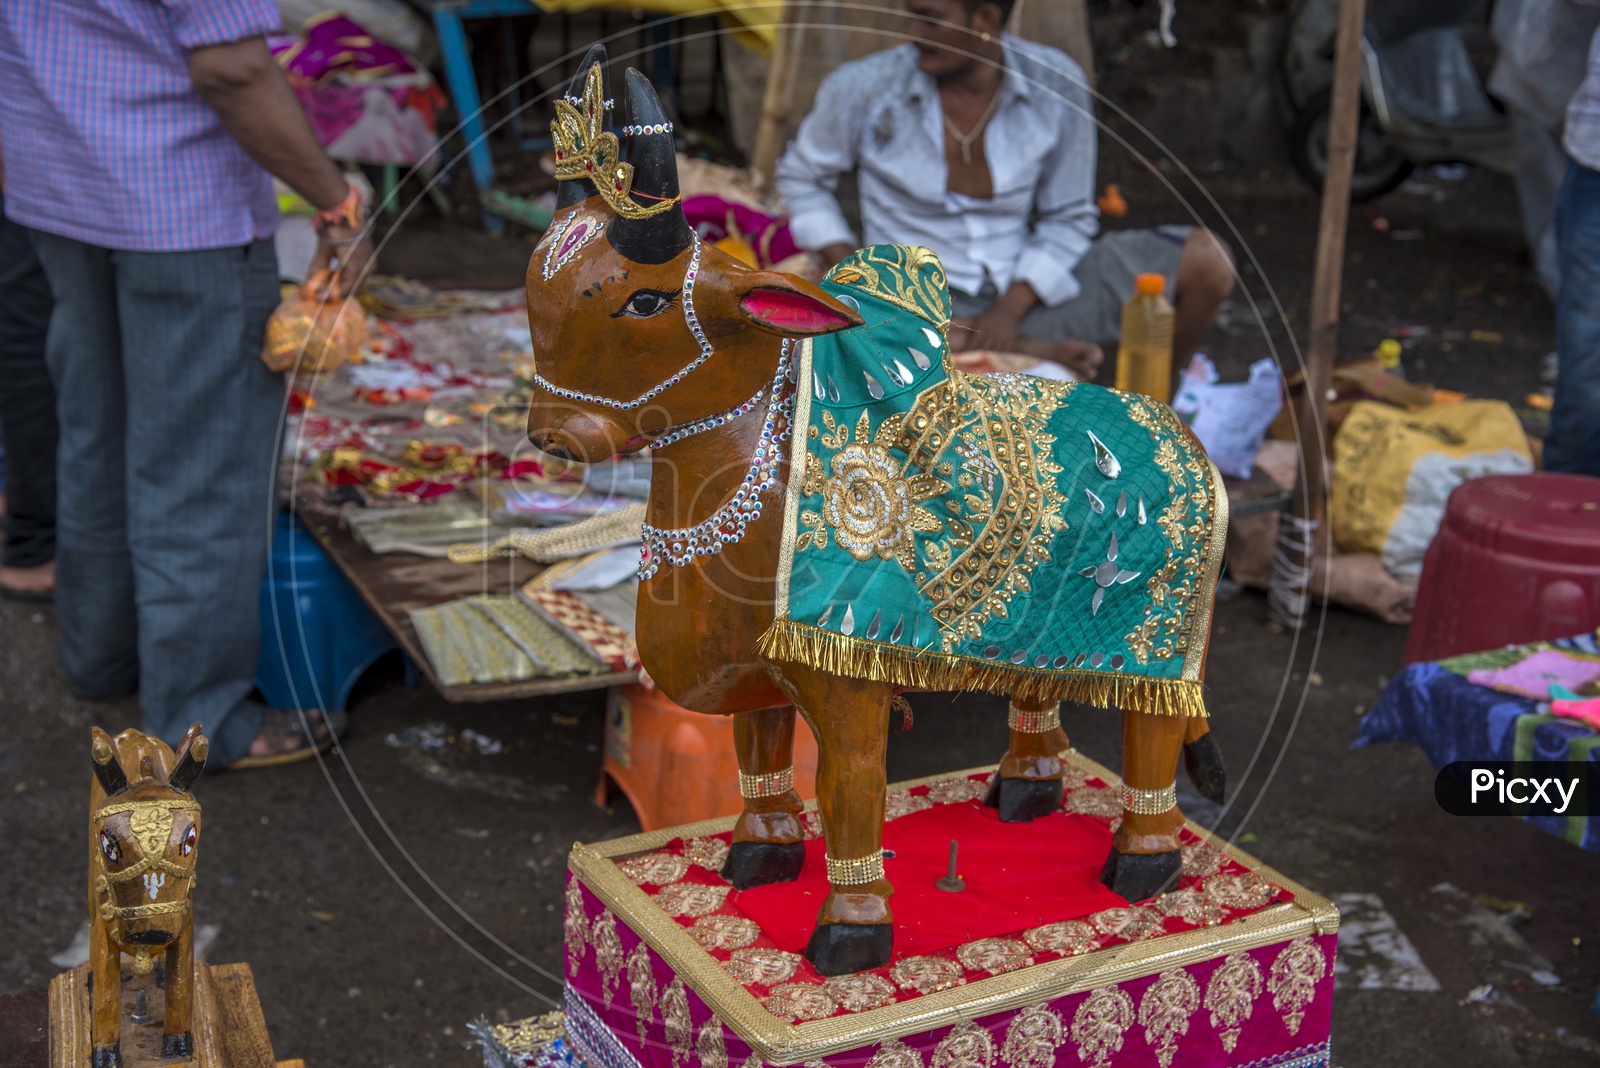 Nagpur People And  children's celebrating the Pola festival by decorating and exhibiting a wooden bull